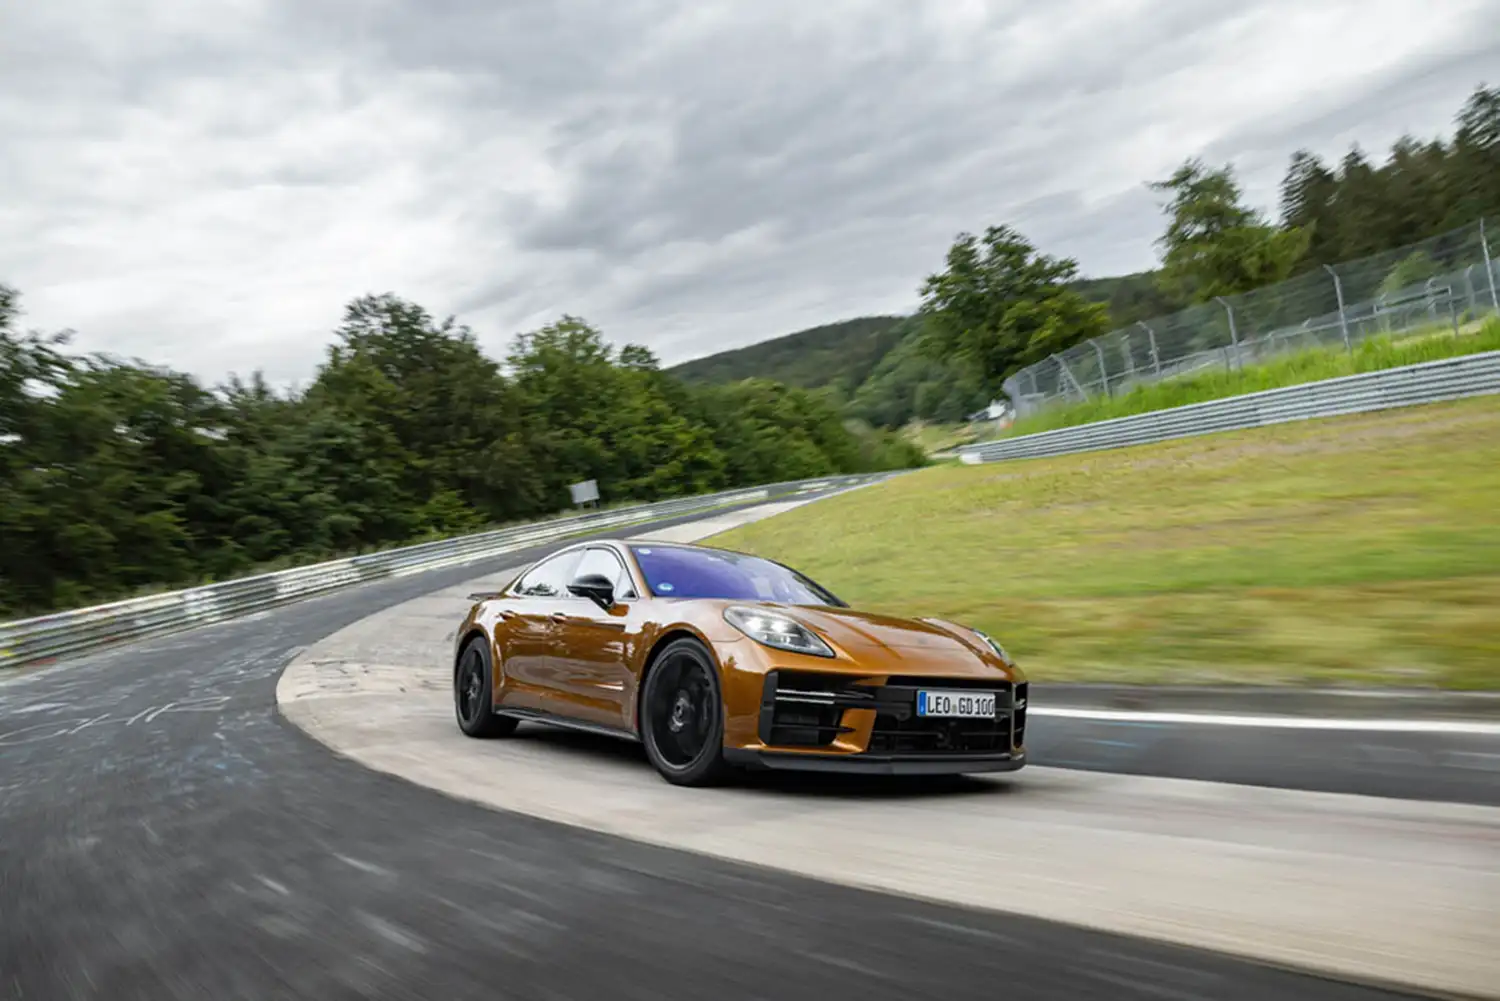 New Porsche Panamera sets a record time on the Nürburgring Nordschleife